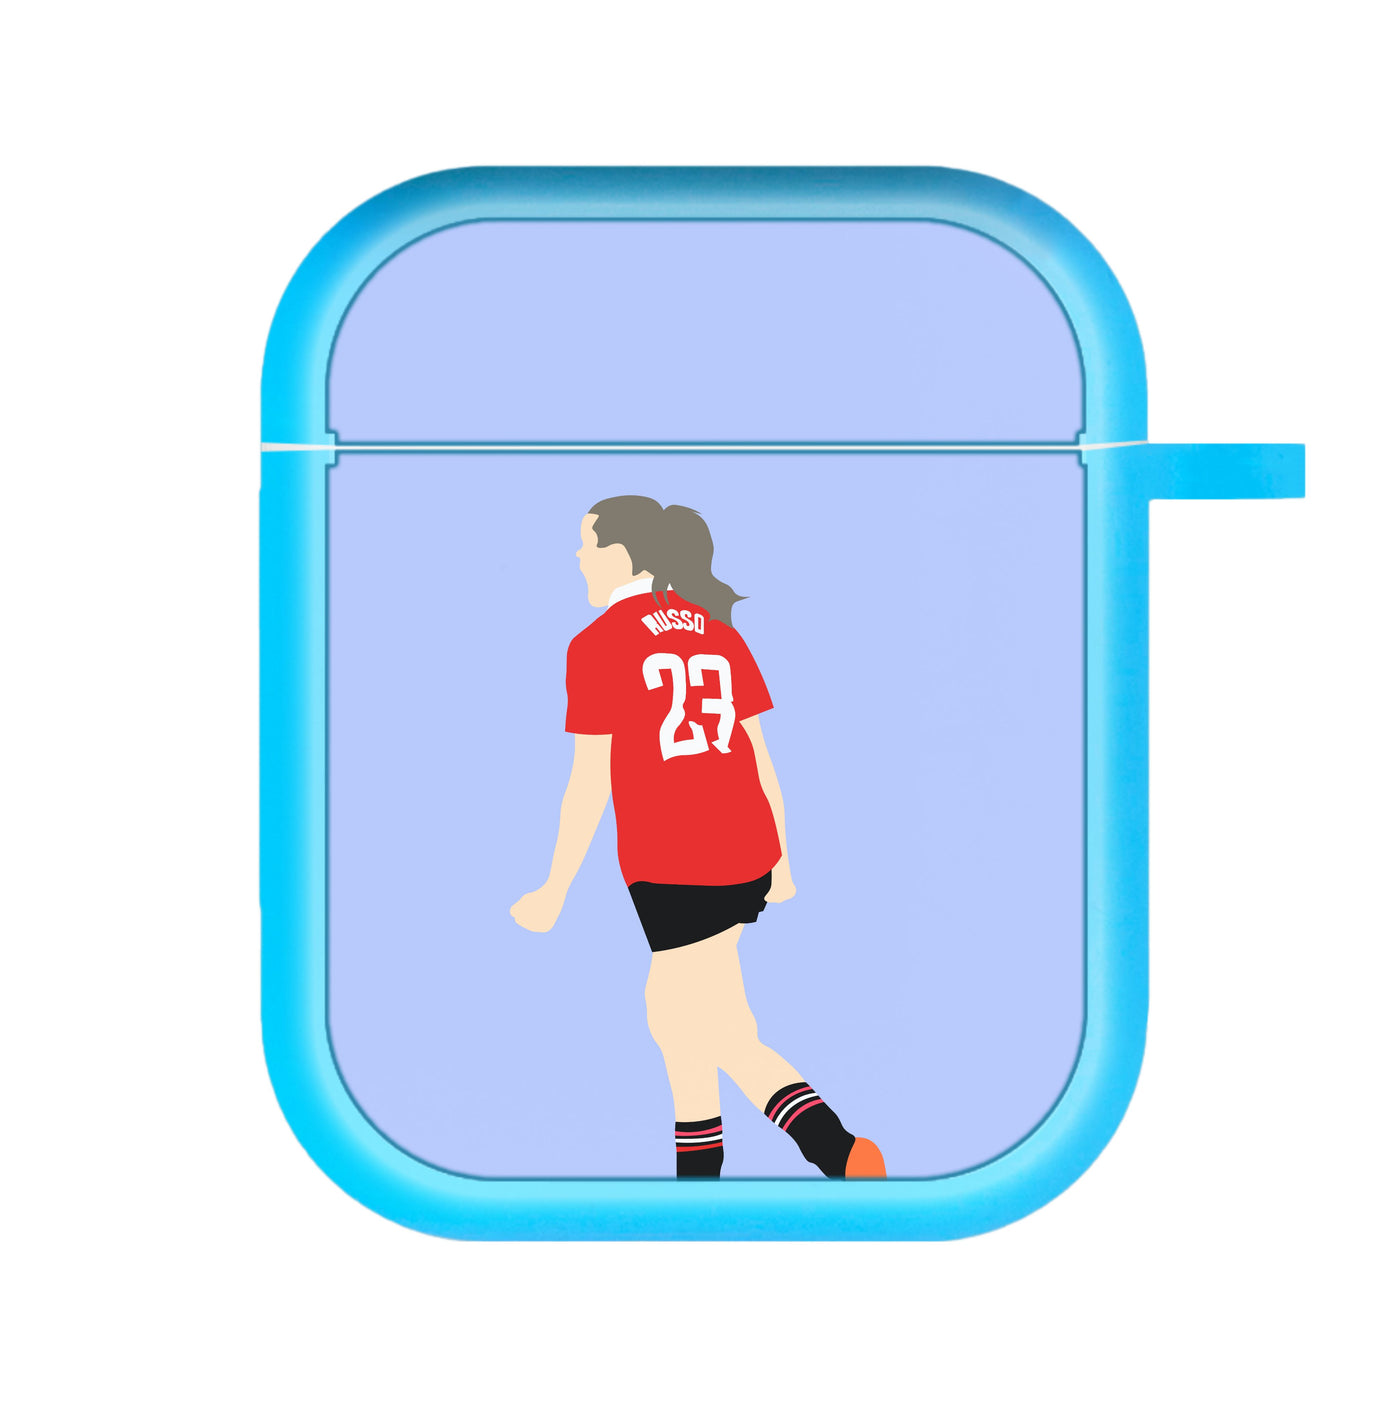 Alessia Russo - Womens World Cup AirPods Case